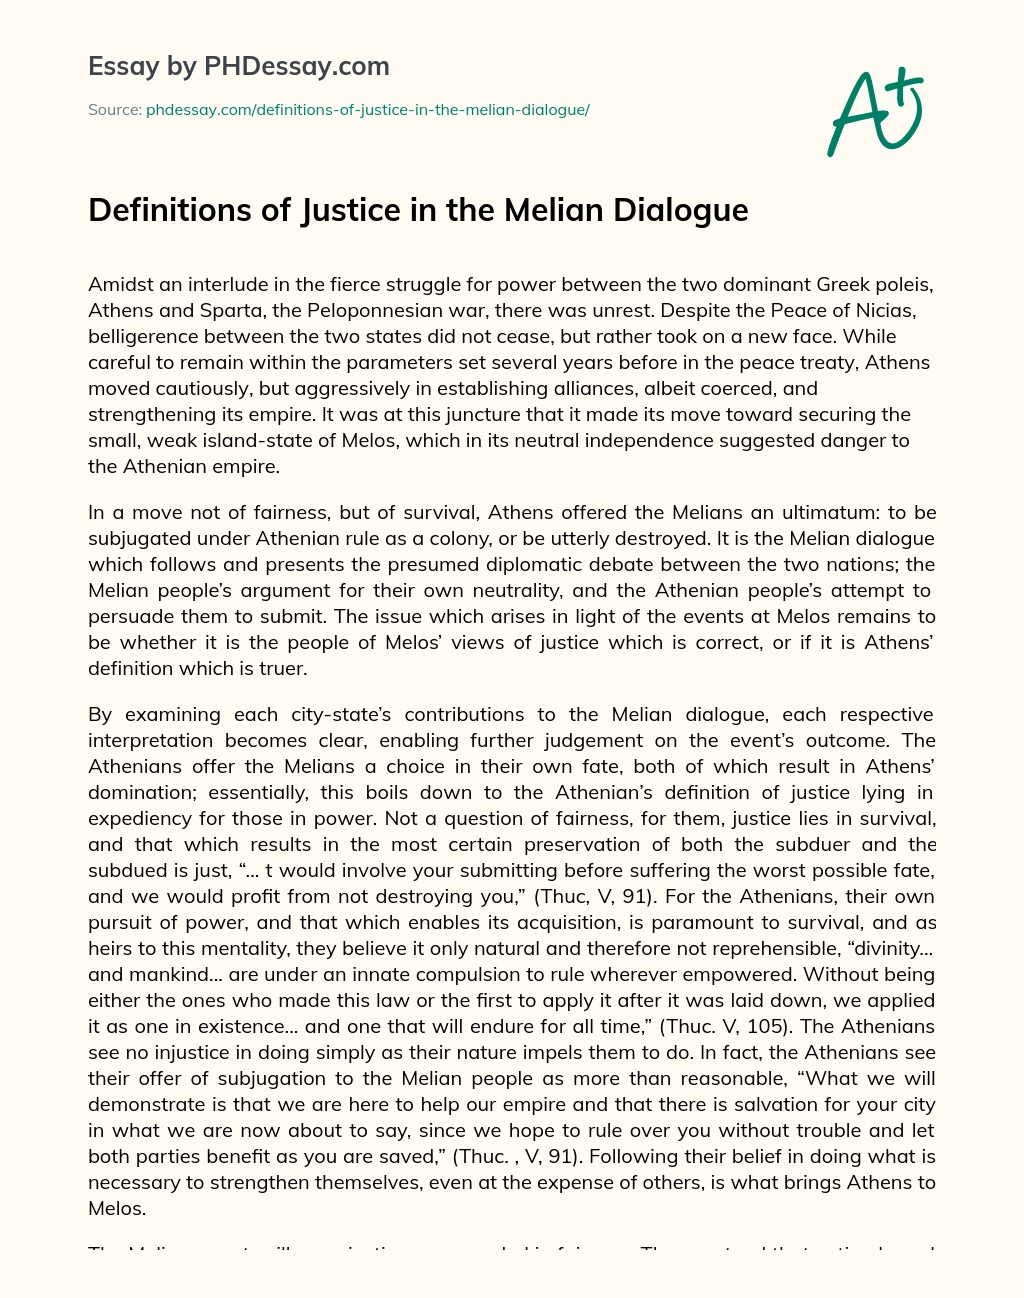 Definitions of Justice in the Melian Dialogue essay